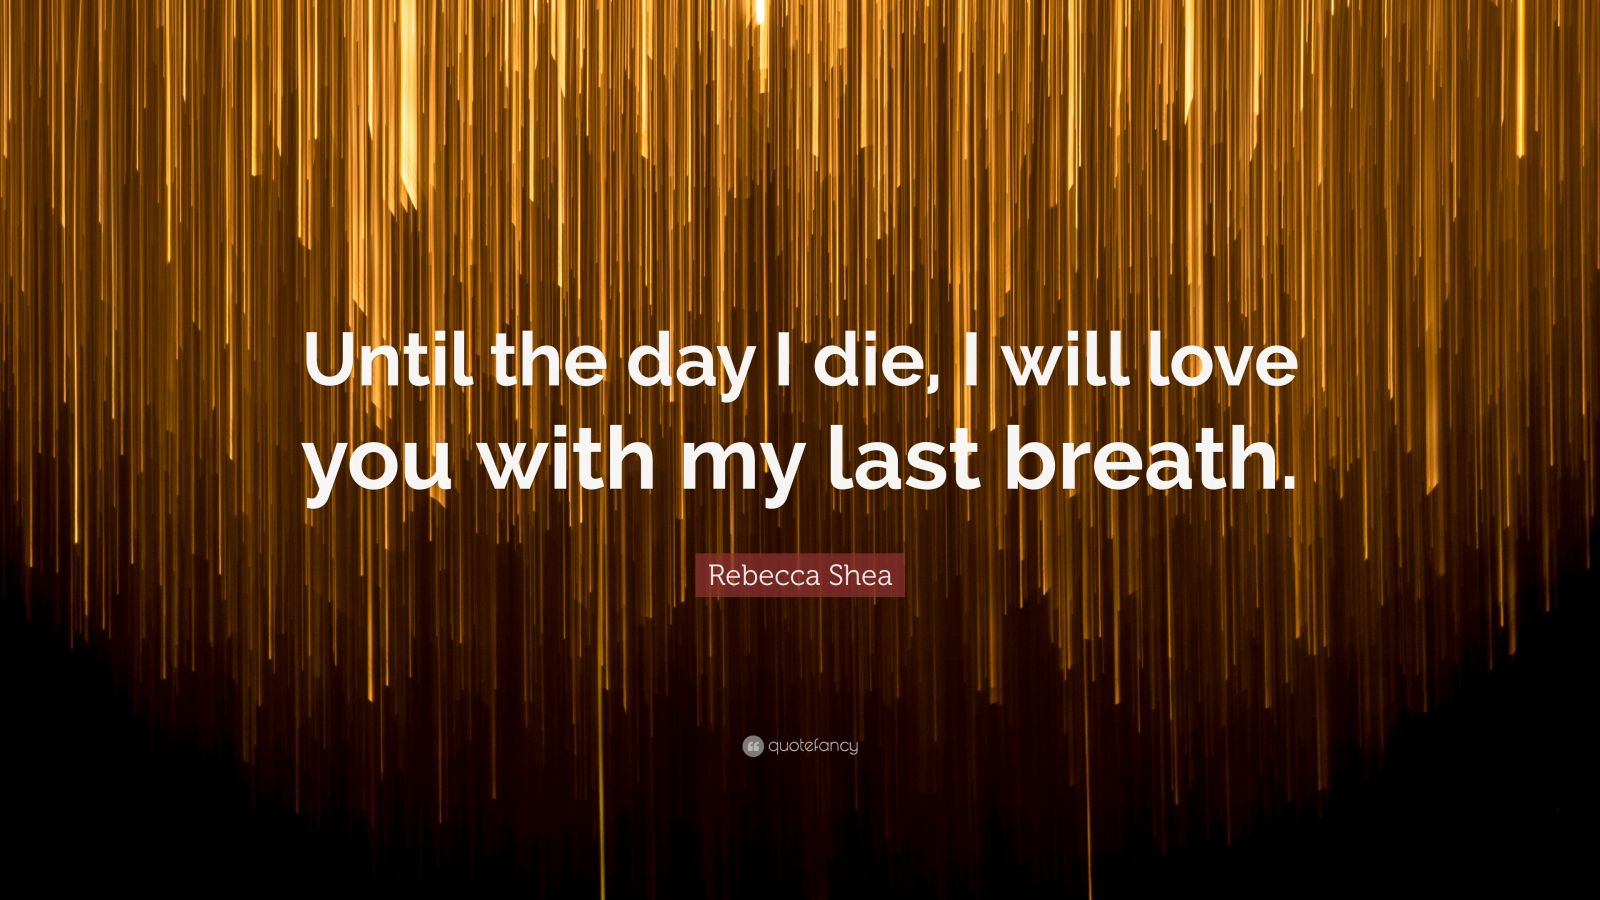 Rebecca Shea Quote: “Until the day I die